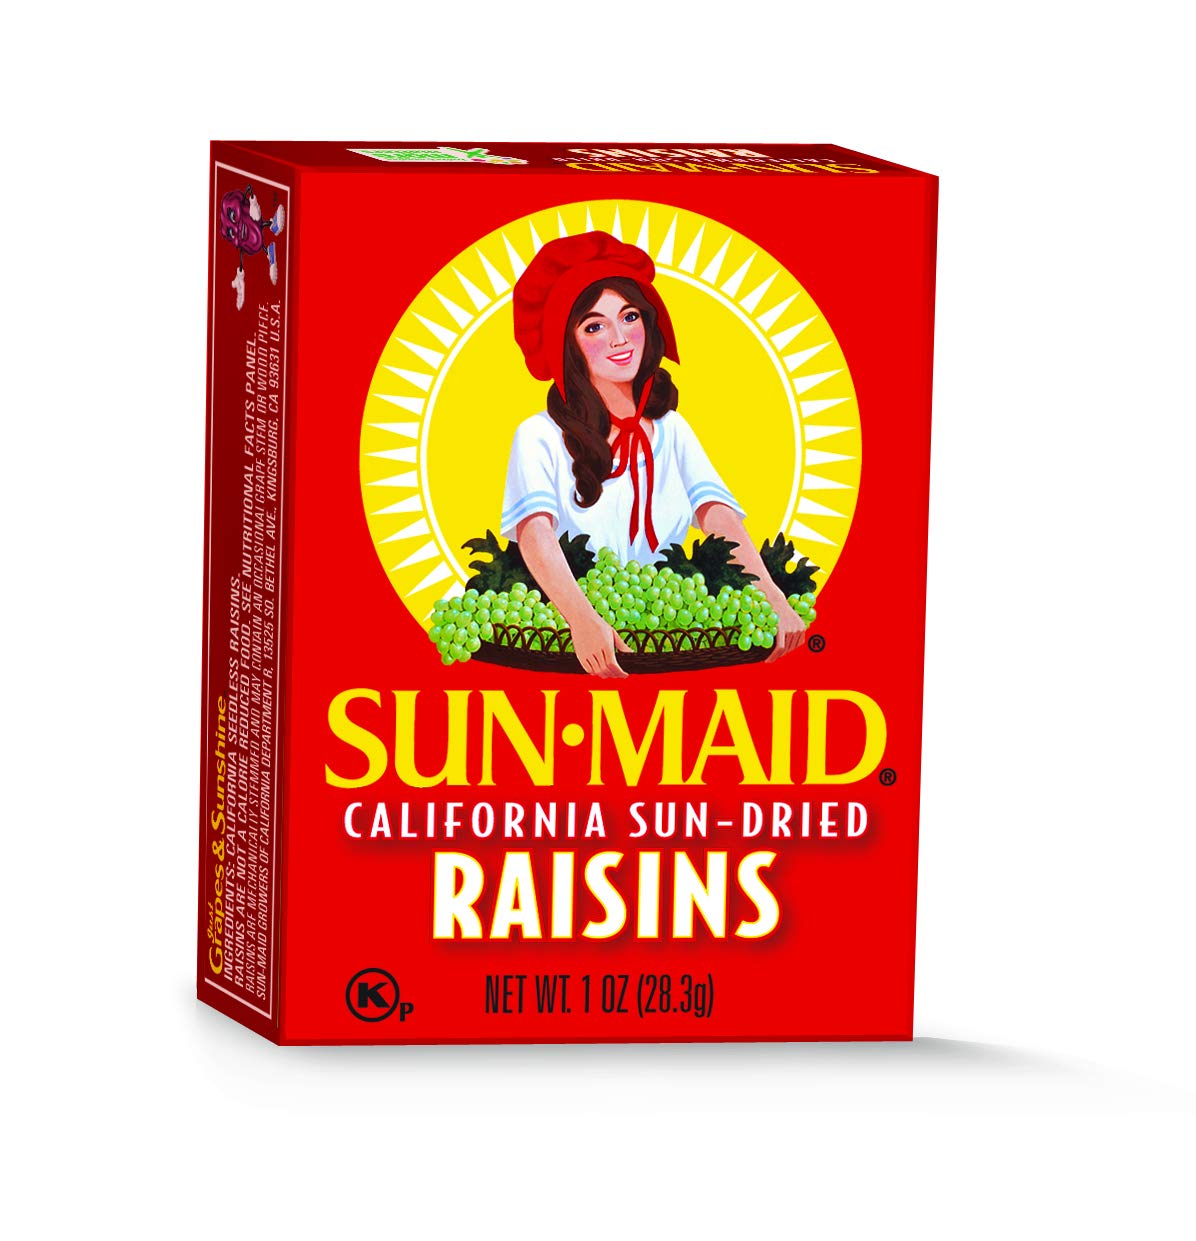 Sun-Maid California Sun-Dried Raisins - (6 Pack) 1 oz Snack-Size Box - Dried Fruit Snack for Lunches, Snacks, and Natural Sweeteners : Everything Else